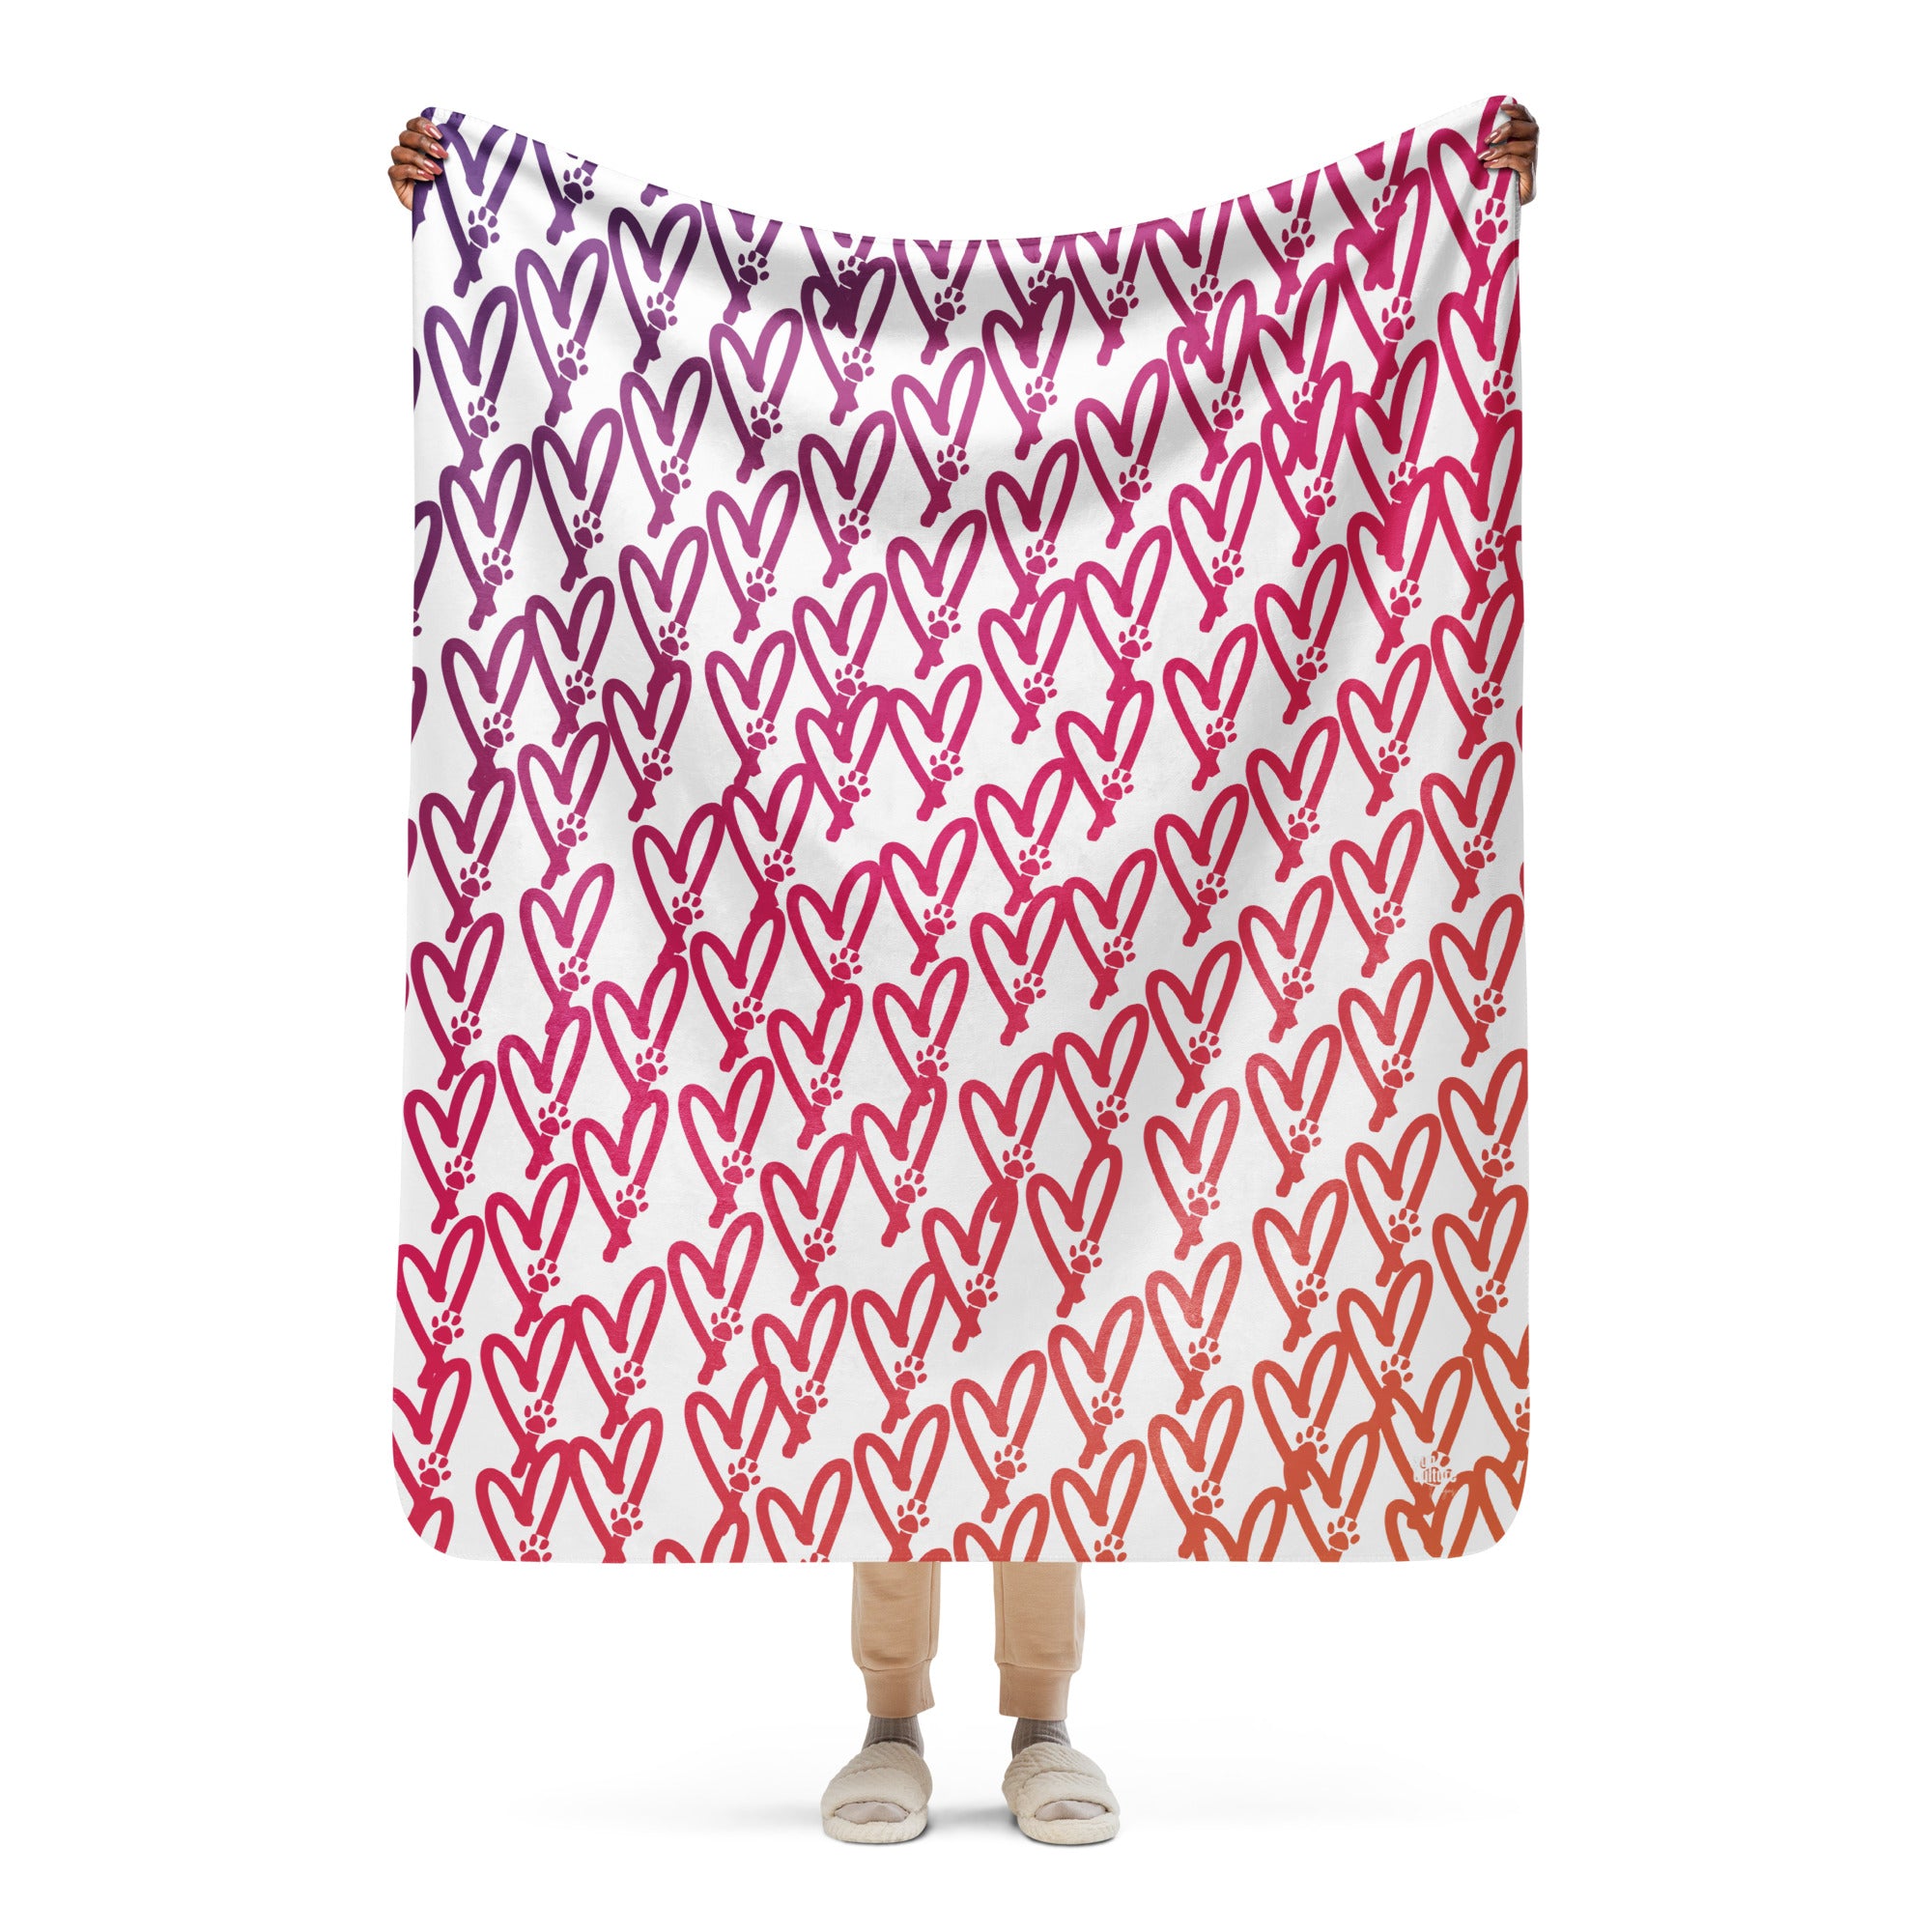 Dog Mom Heart and Paw Ombre Sherpa Blanket - dog-mom-heart-and-paw-ombre-sherpa-fleece-blanket